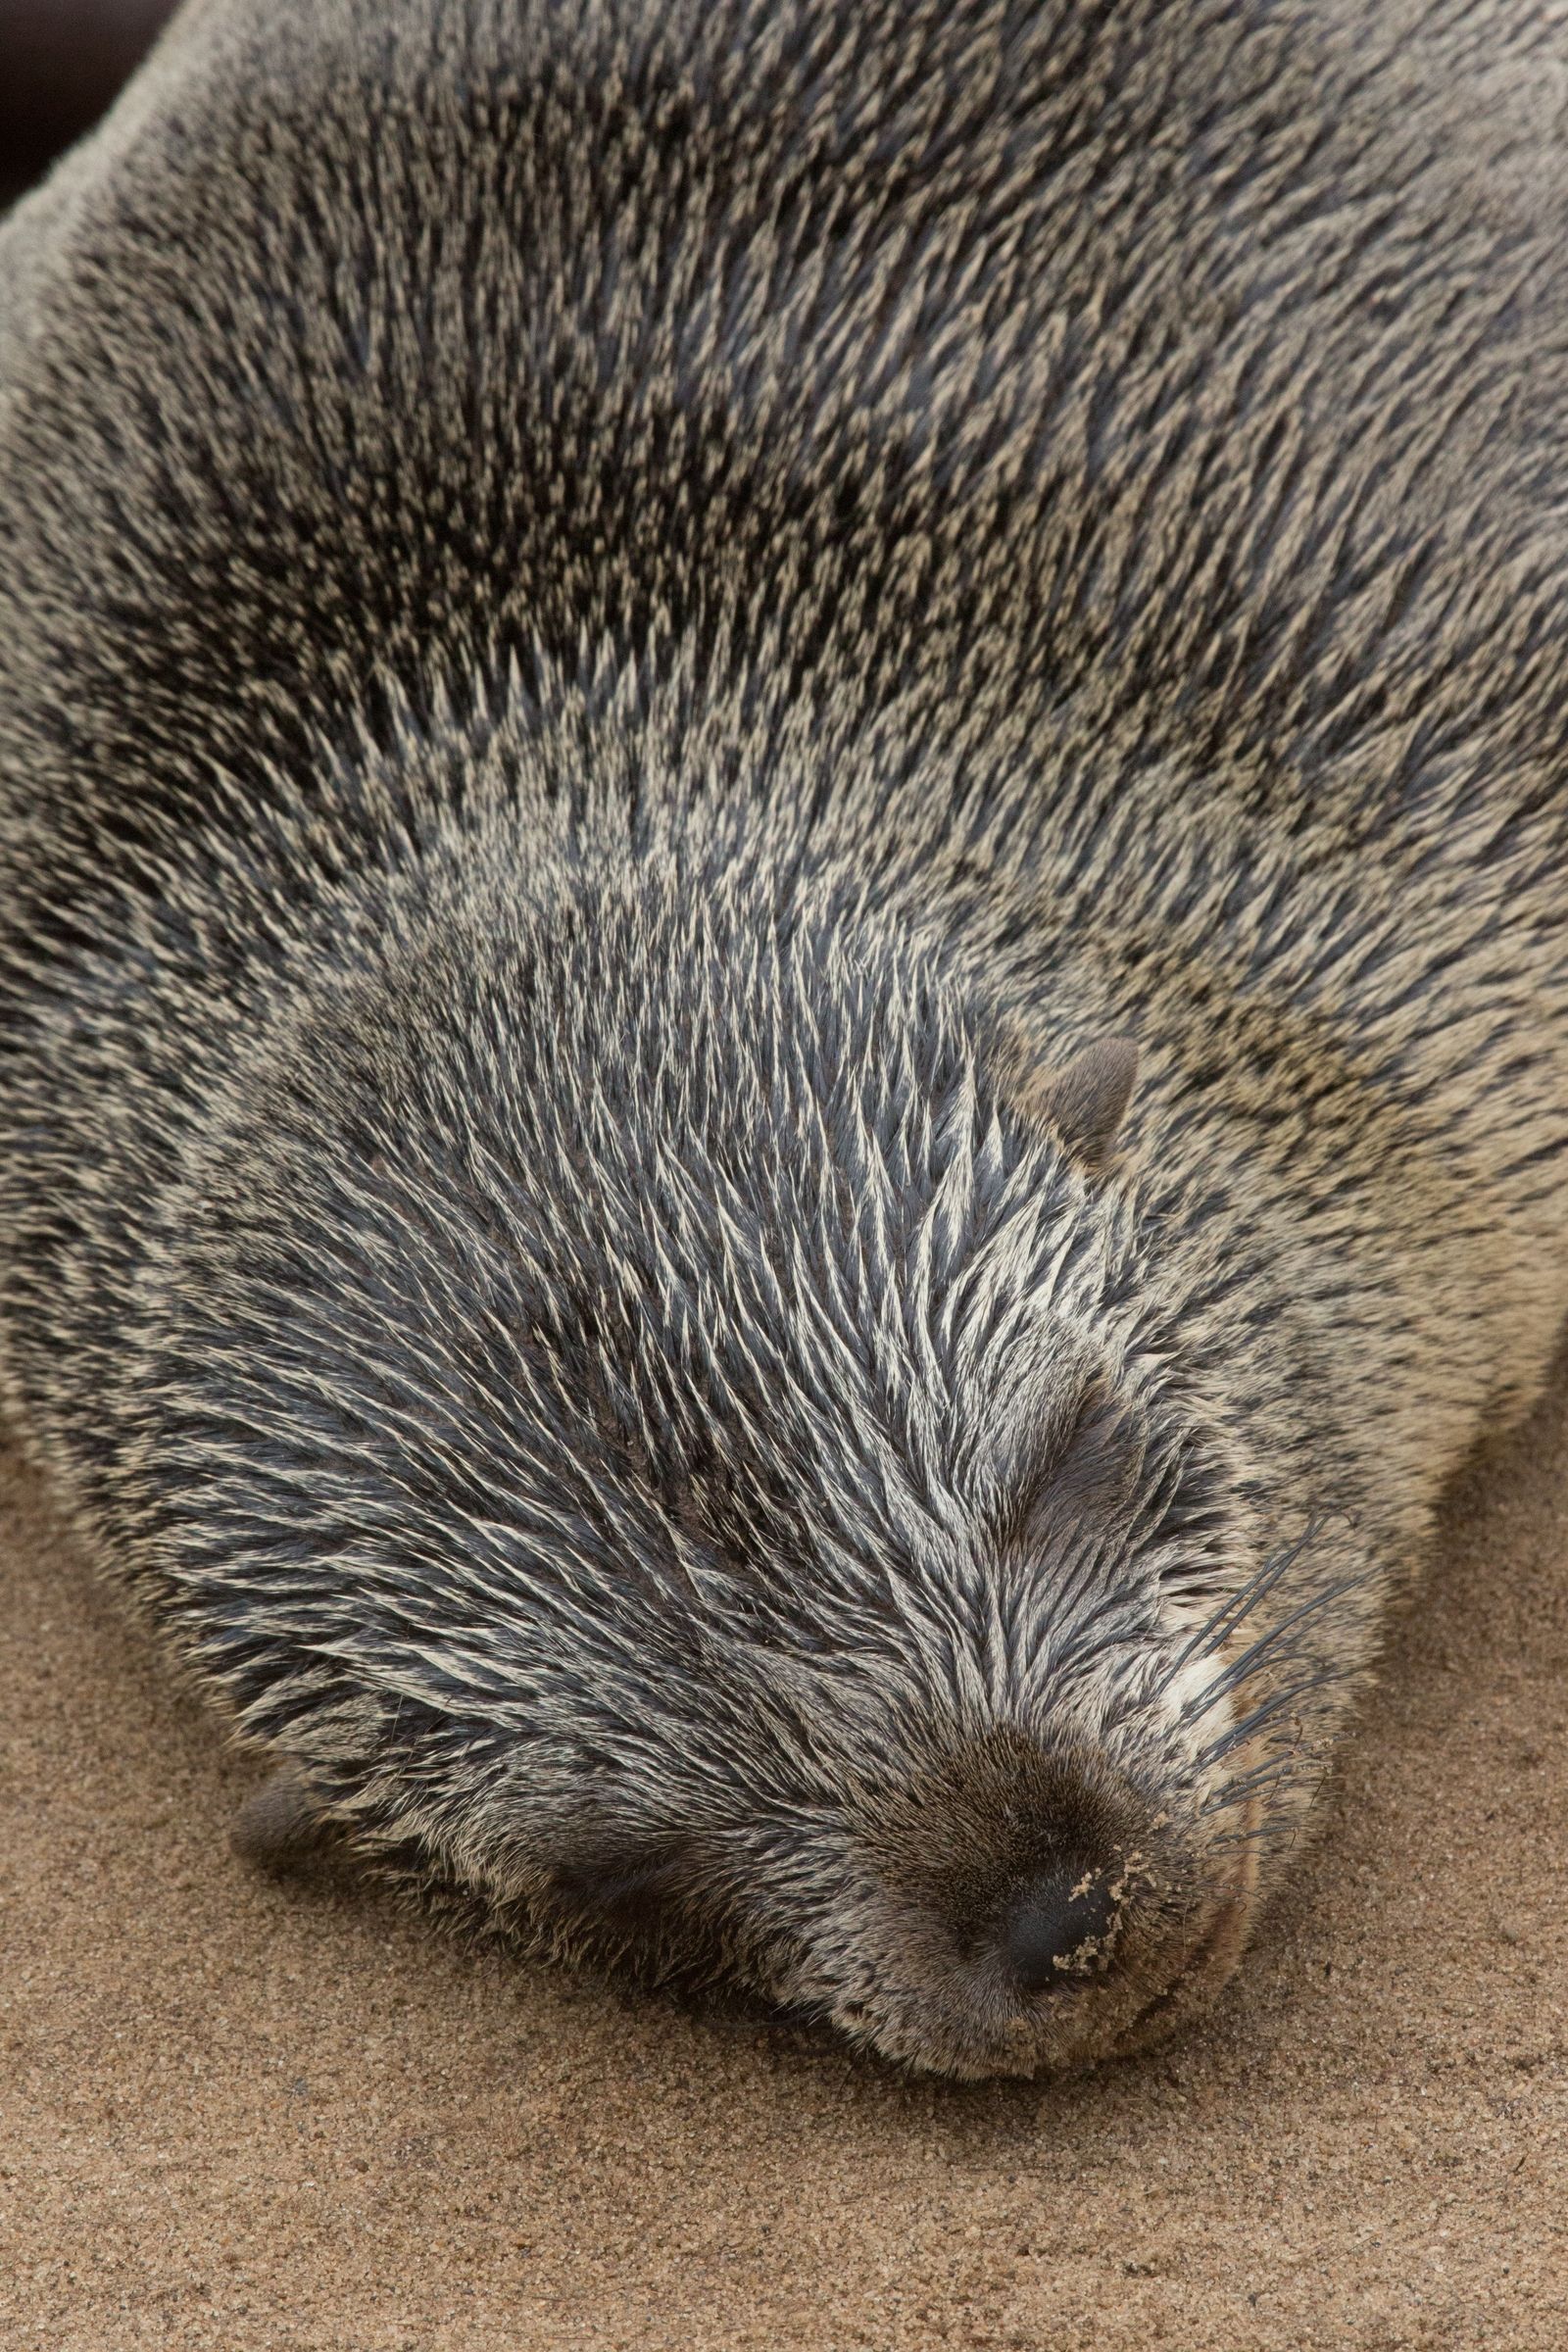 A sleeping Cape Fur Seal during our wildlife photography tour of Namibia